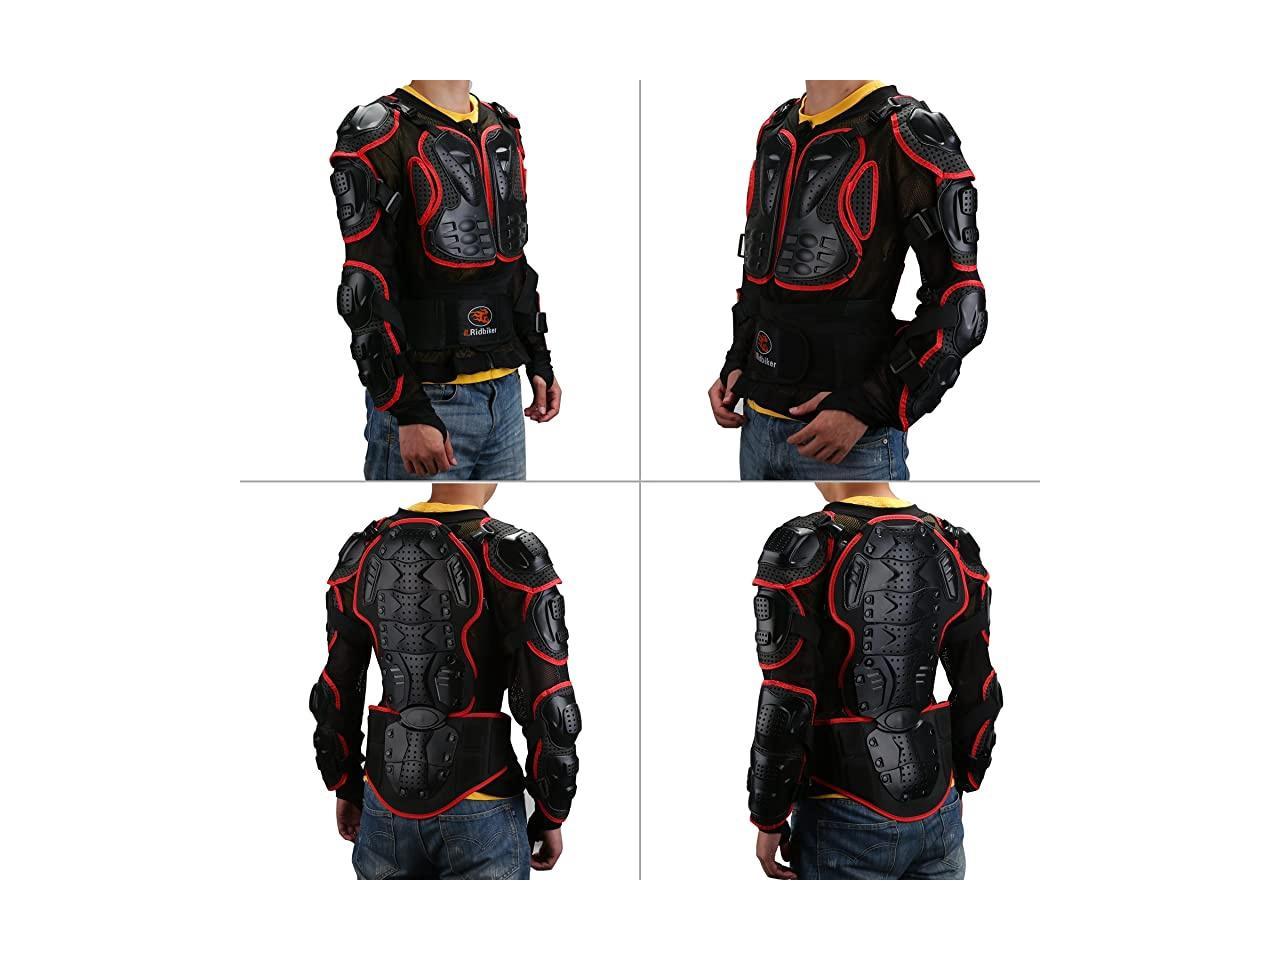 Ridbiker Motorcycle Full Body Armor Protector Removable Racing Jacket Motocross Spine Chest Motocross Protective Shirt 